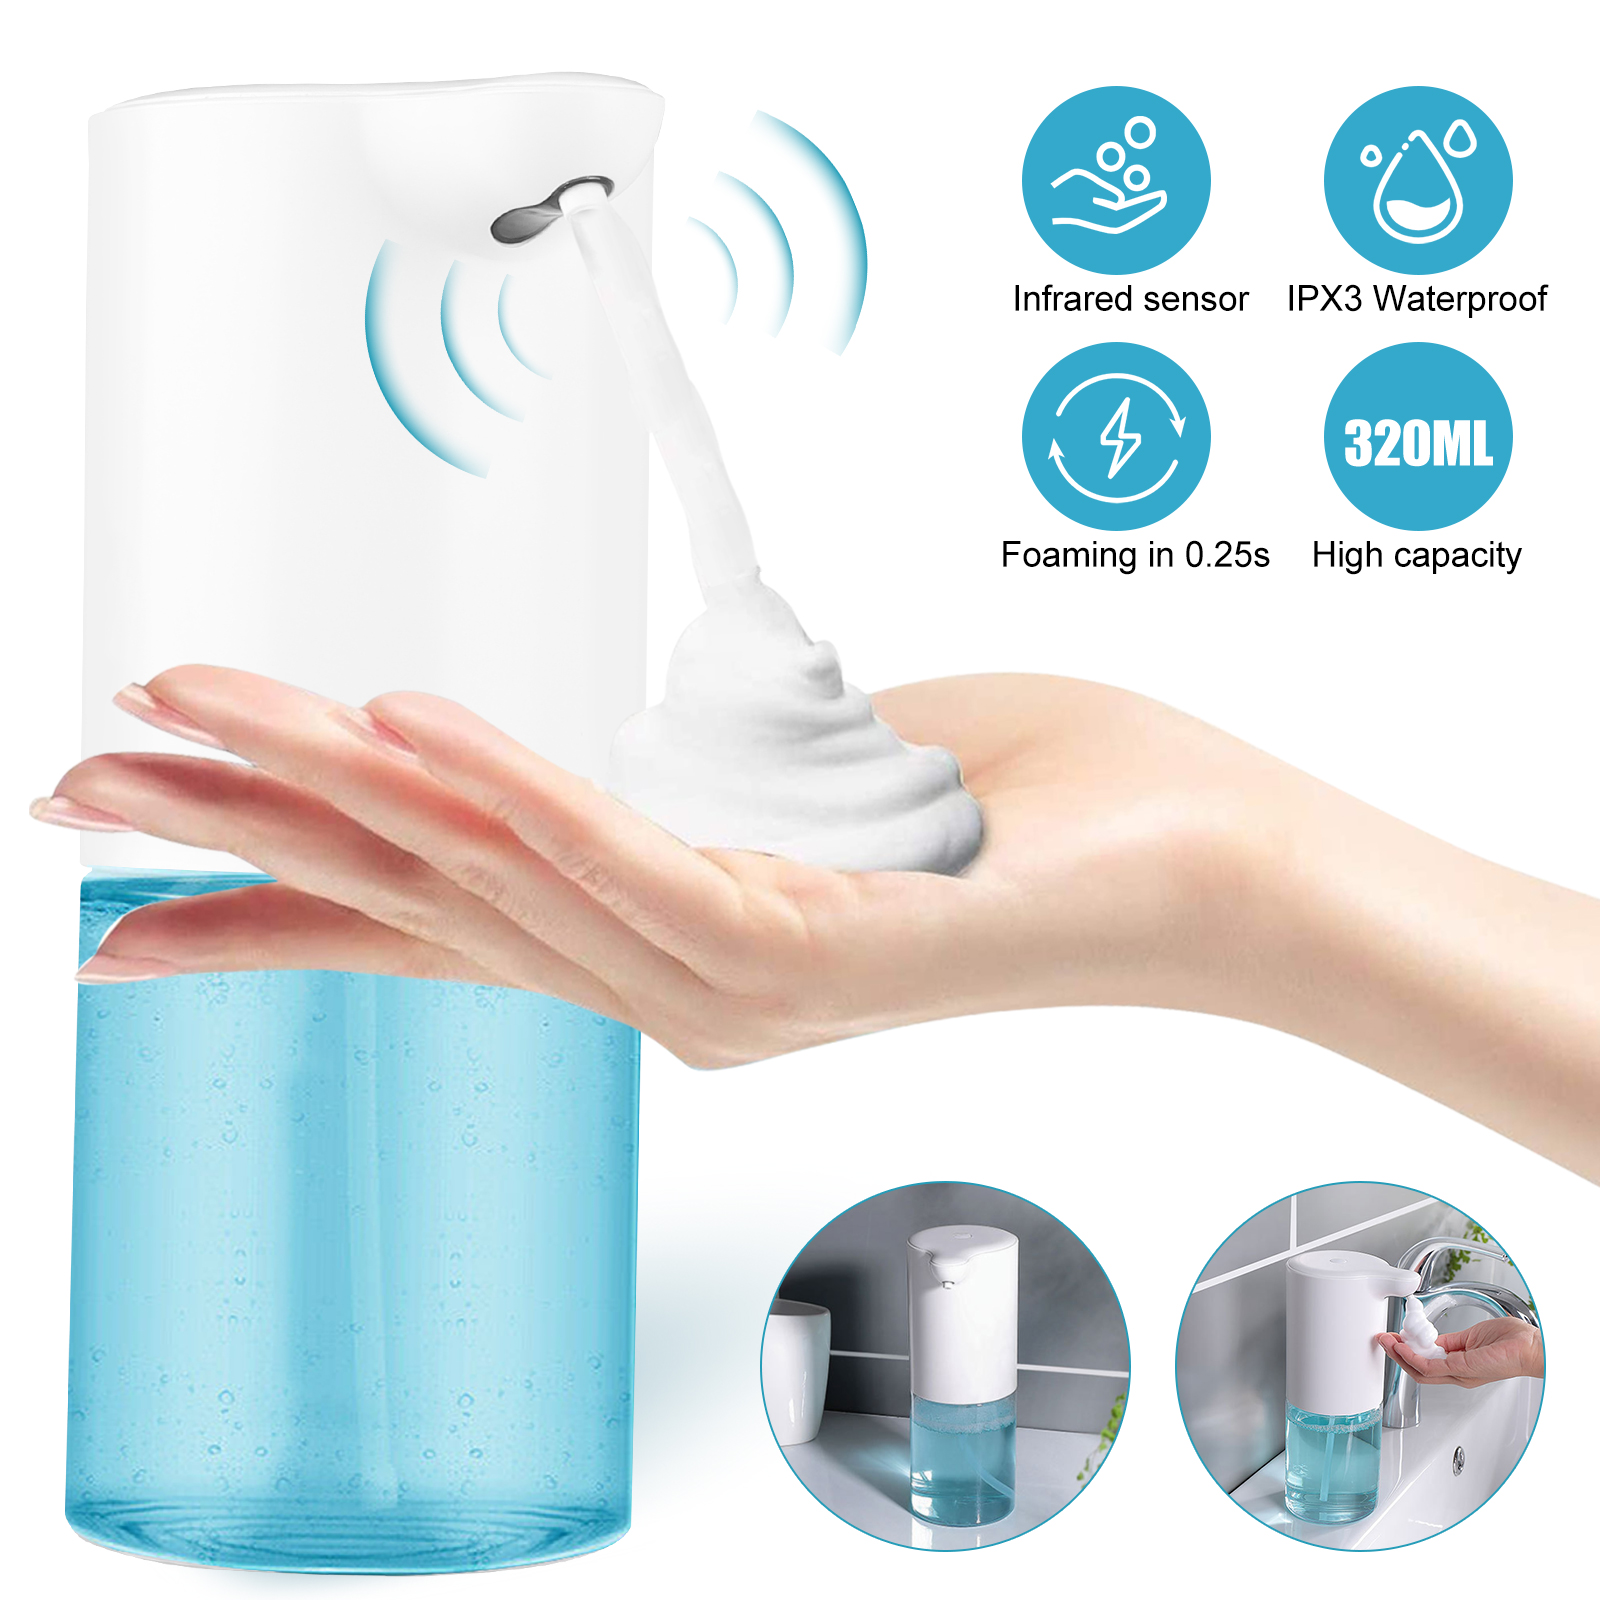 Touchless High Capacity Automatic Foaming Soap Dispenser Equipped w//Infrared Motion Sensor Waterproof Base Suitable for Bathroom Kitchen Hotel Restaurant Automatic Soap Dispenser